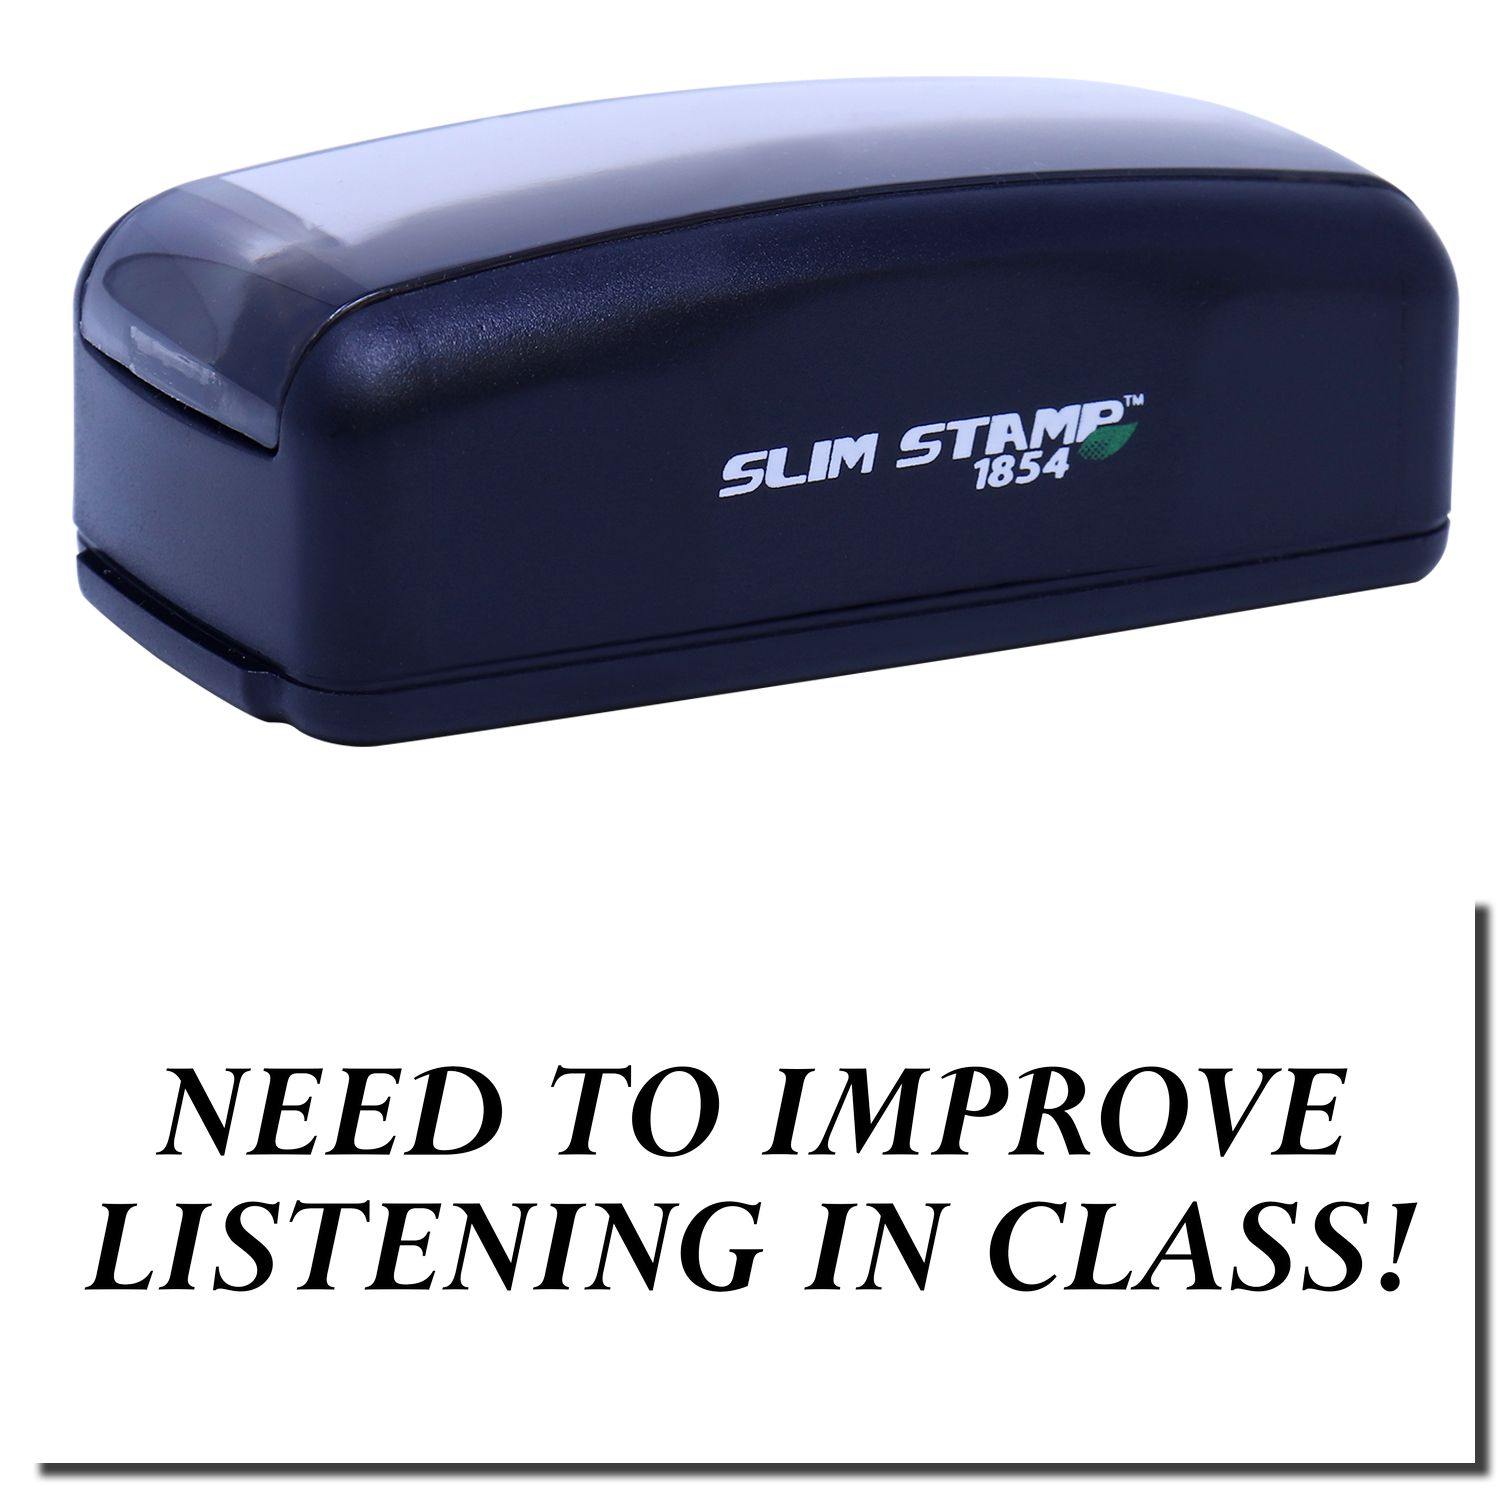 A stock office pre-inked stamp with a stamped image showing how the text "NEED TO IMPROVE LISTENING IN CLASS!" in a large font is displayed after stamping.